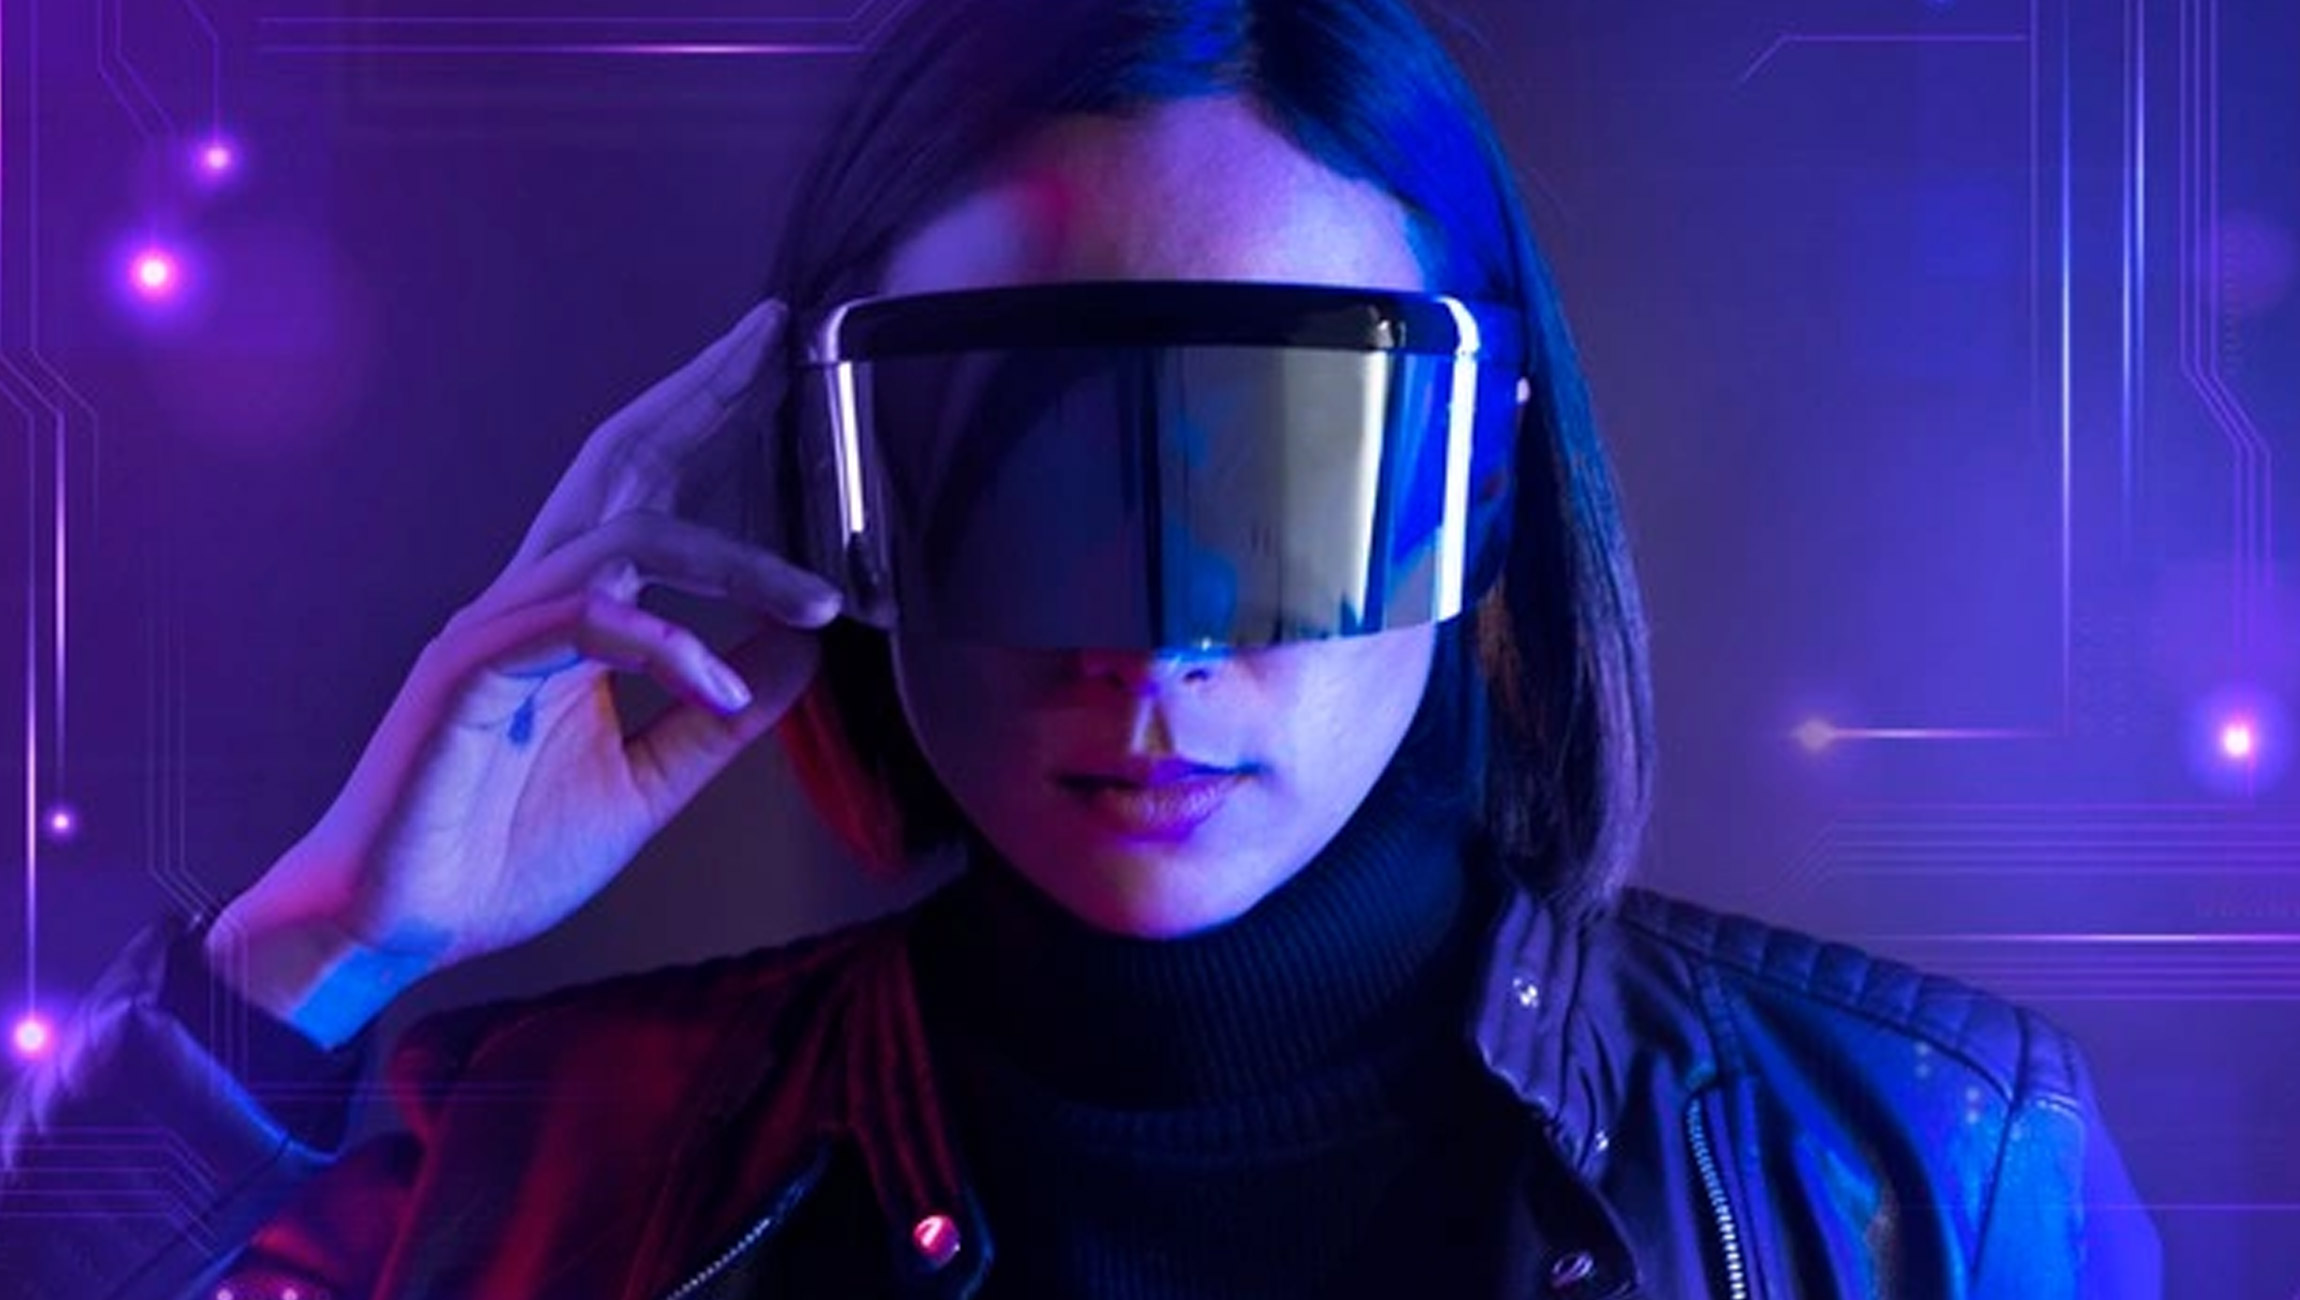 October: Largest Industrial Metaverse, Enterprise AR/VR/MR (XR) Event Comes to San Diego; Hear Enterprises, Discover Immersive Solutions for Business & Industry